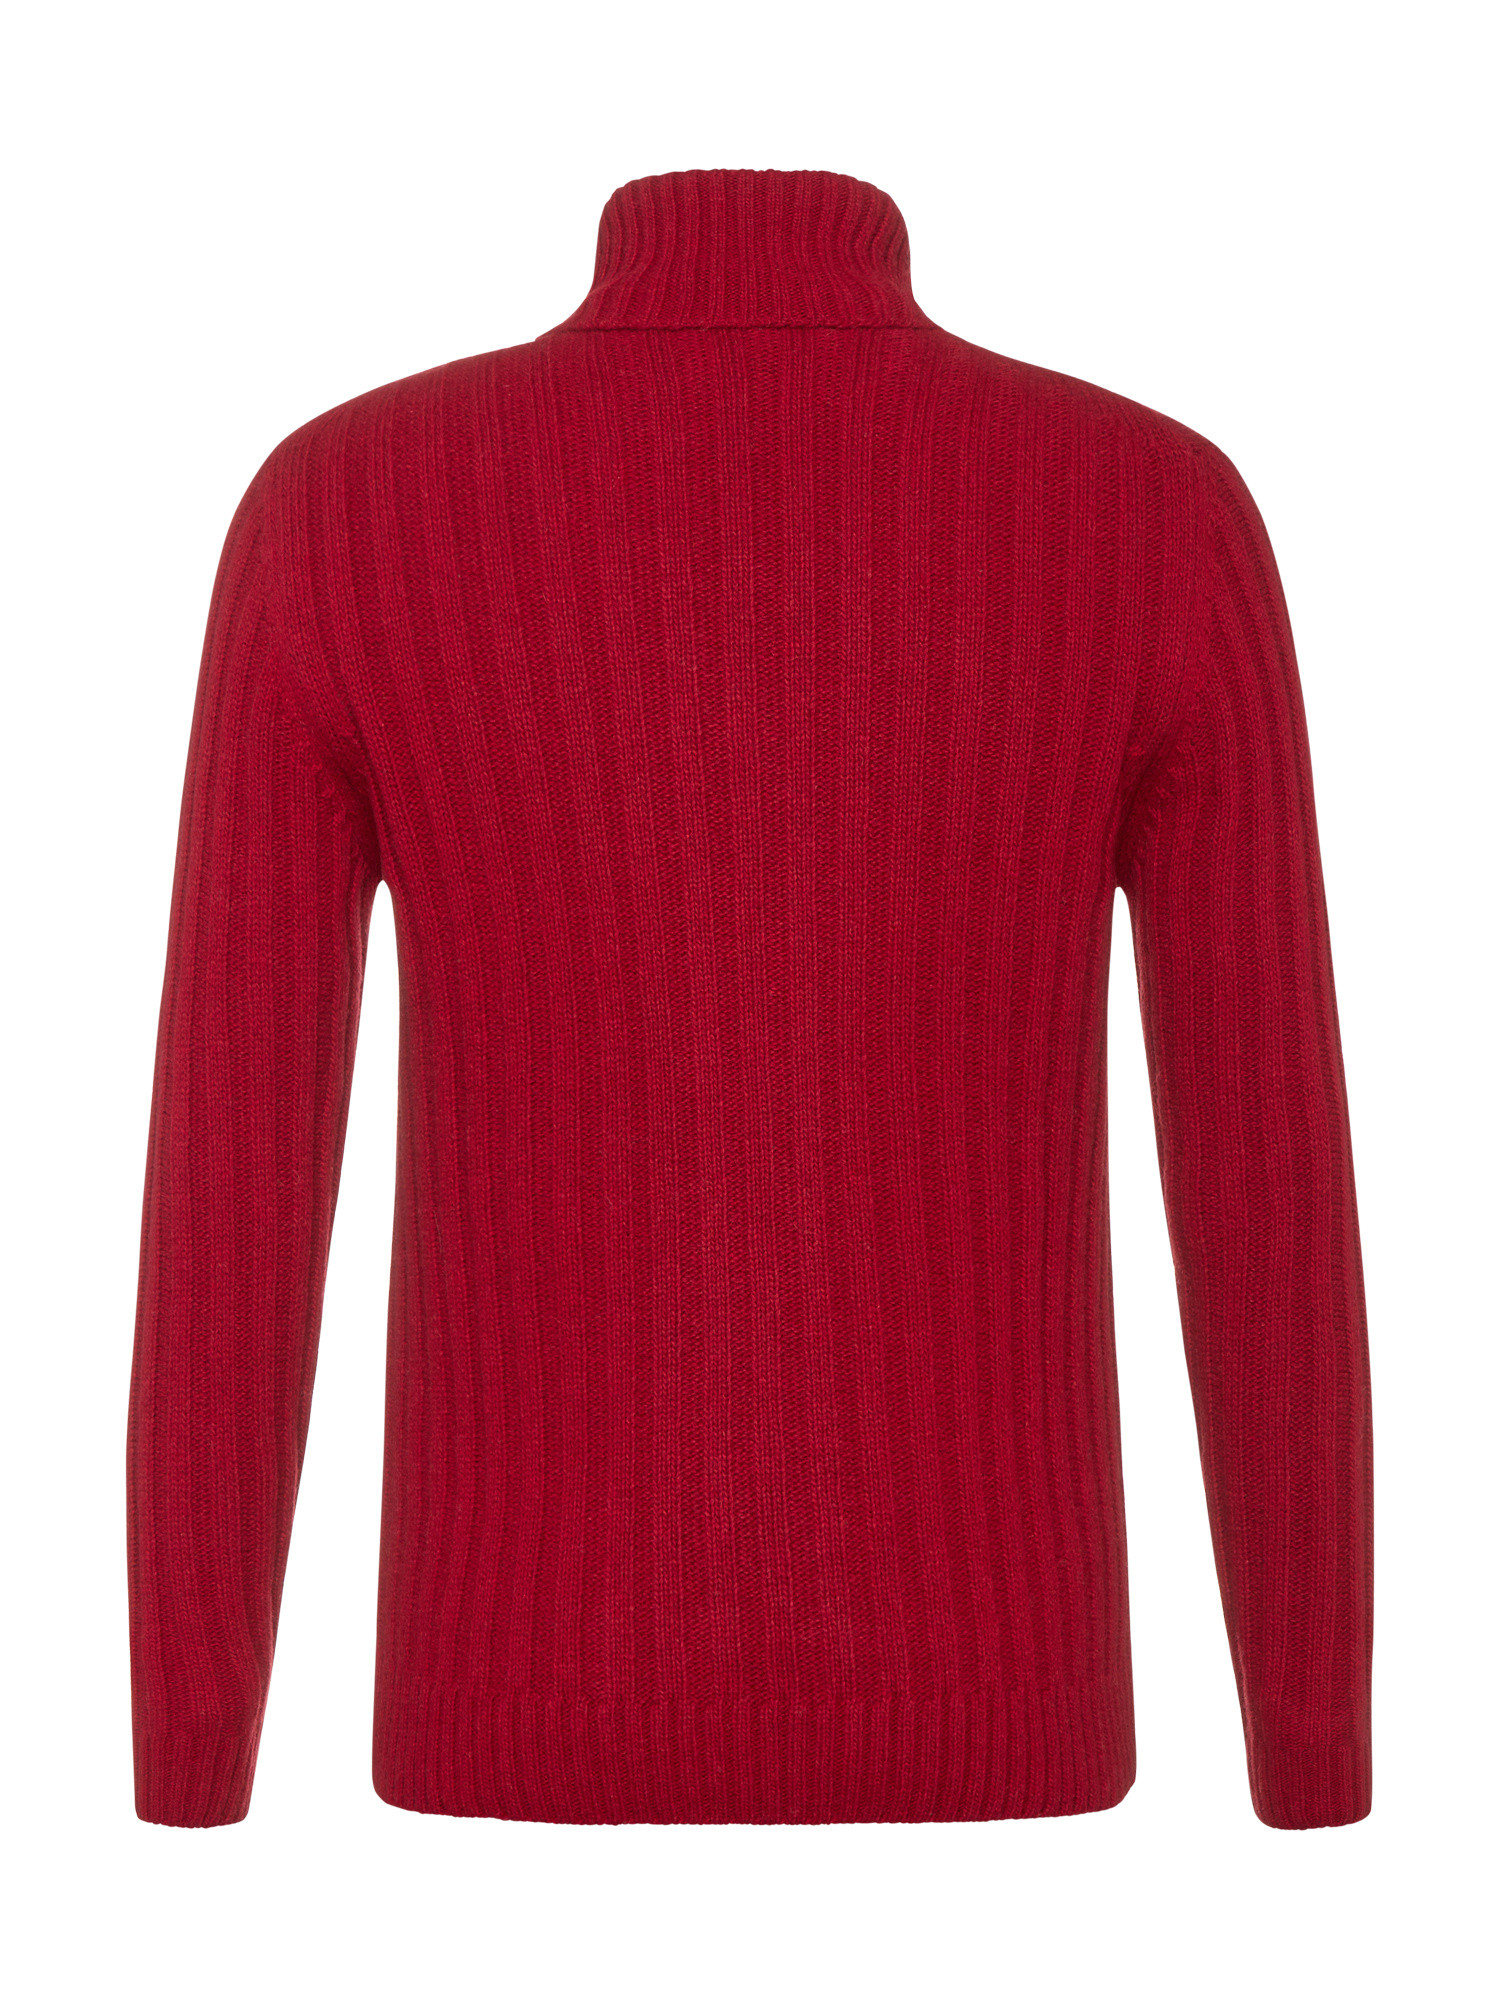 Luca D'Altieri - Recycled wool turtleneck, Red, large image number 1